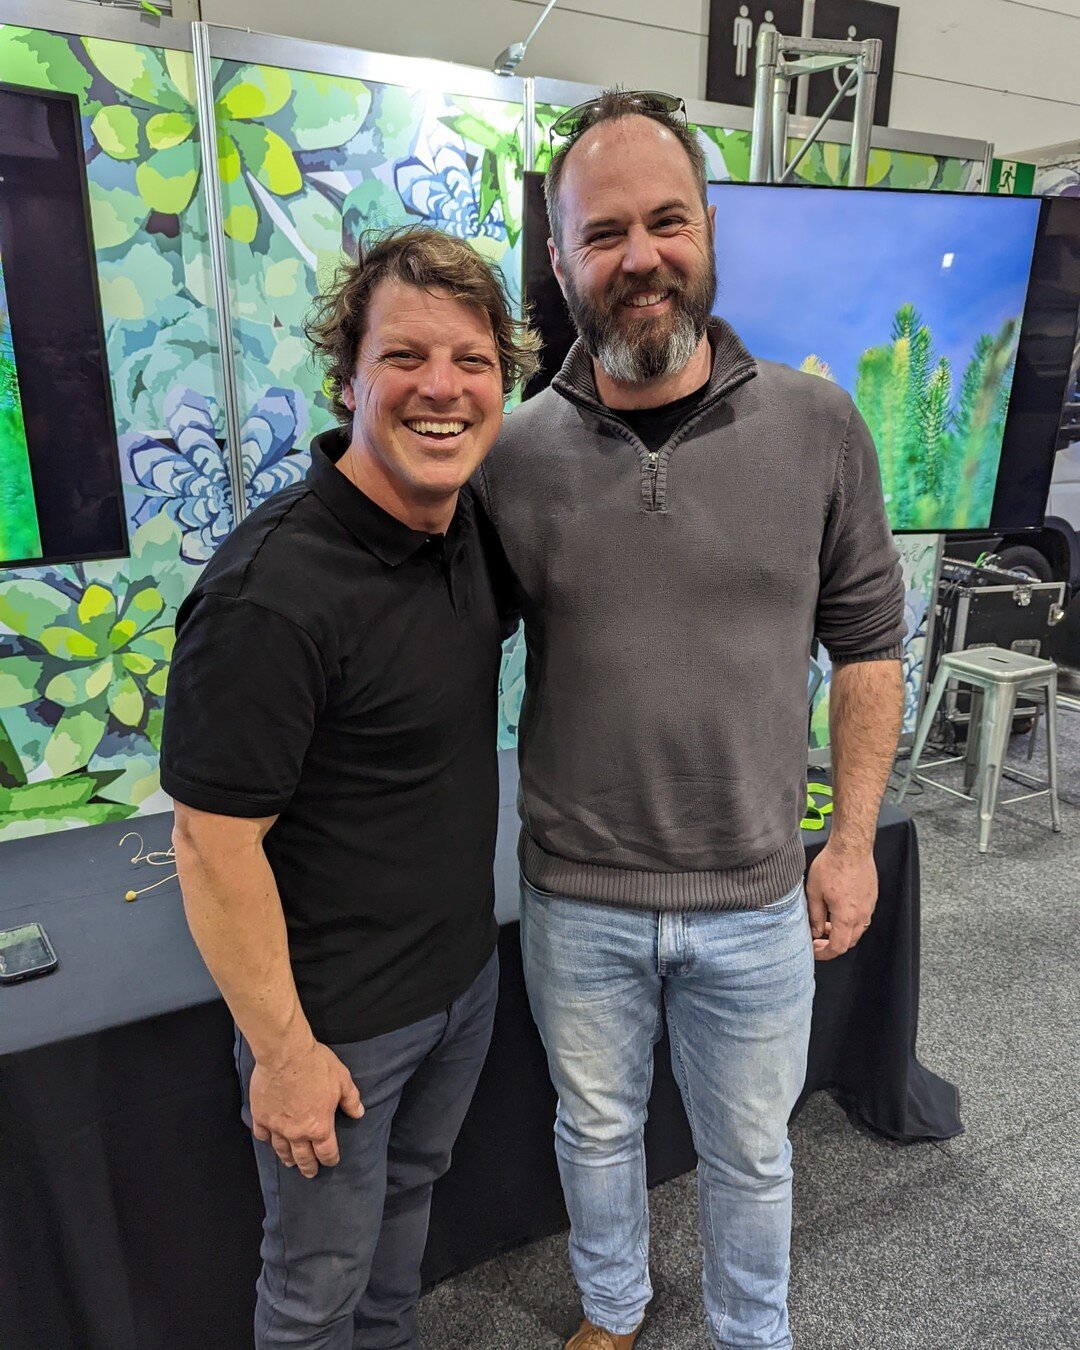 Big thanks to @danscrepes for the opportunity to have a good old chat about all things native gardens at the 2022 @melbournehomeshow 

#melbournebackyard #melbournelifestyle #melbourneoutdoor #melbournelandscaper #melbournelandscapedesign #melbournel